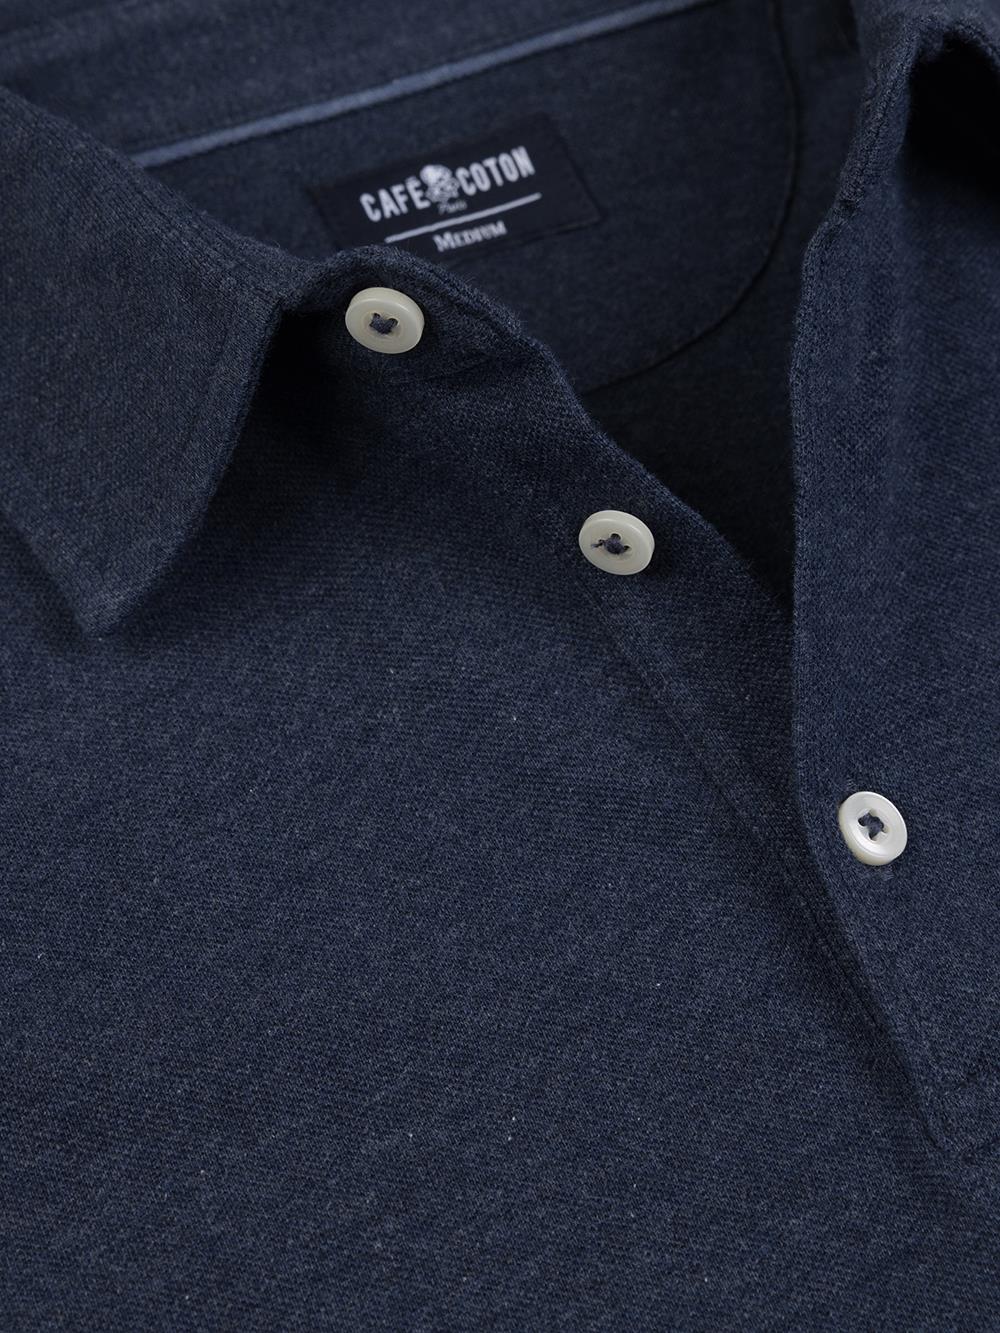 Heritage Polo in mottled blue pique